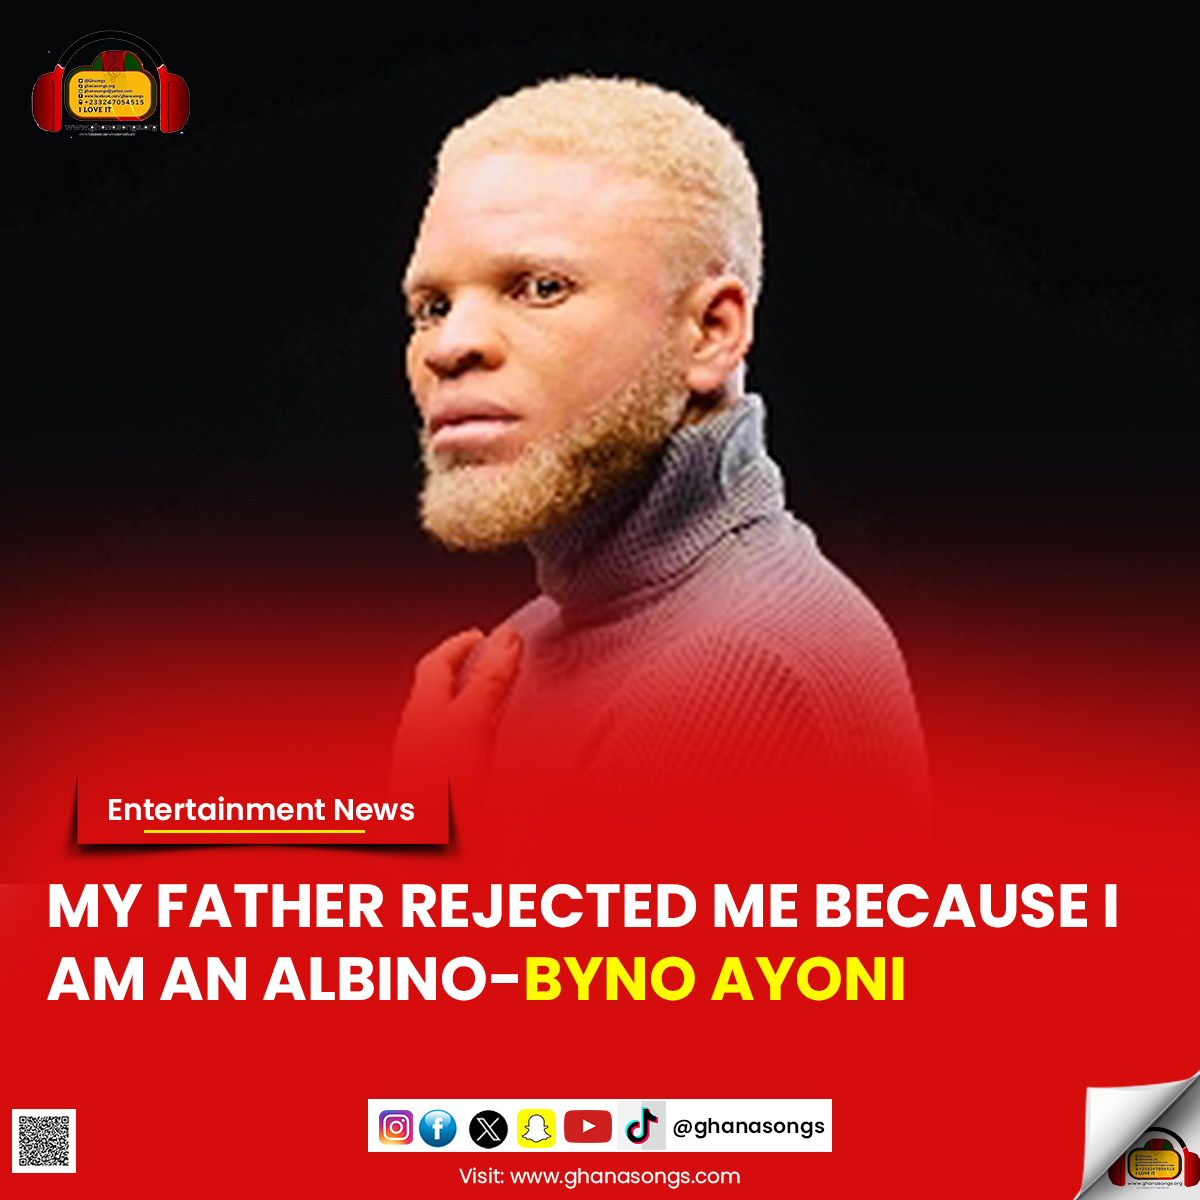 My father rejected me because I am an albino - Byno Ayoni